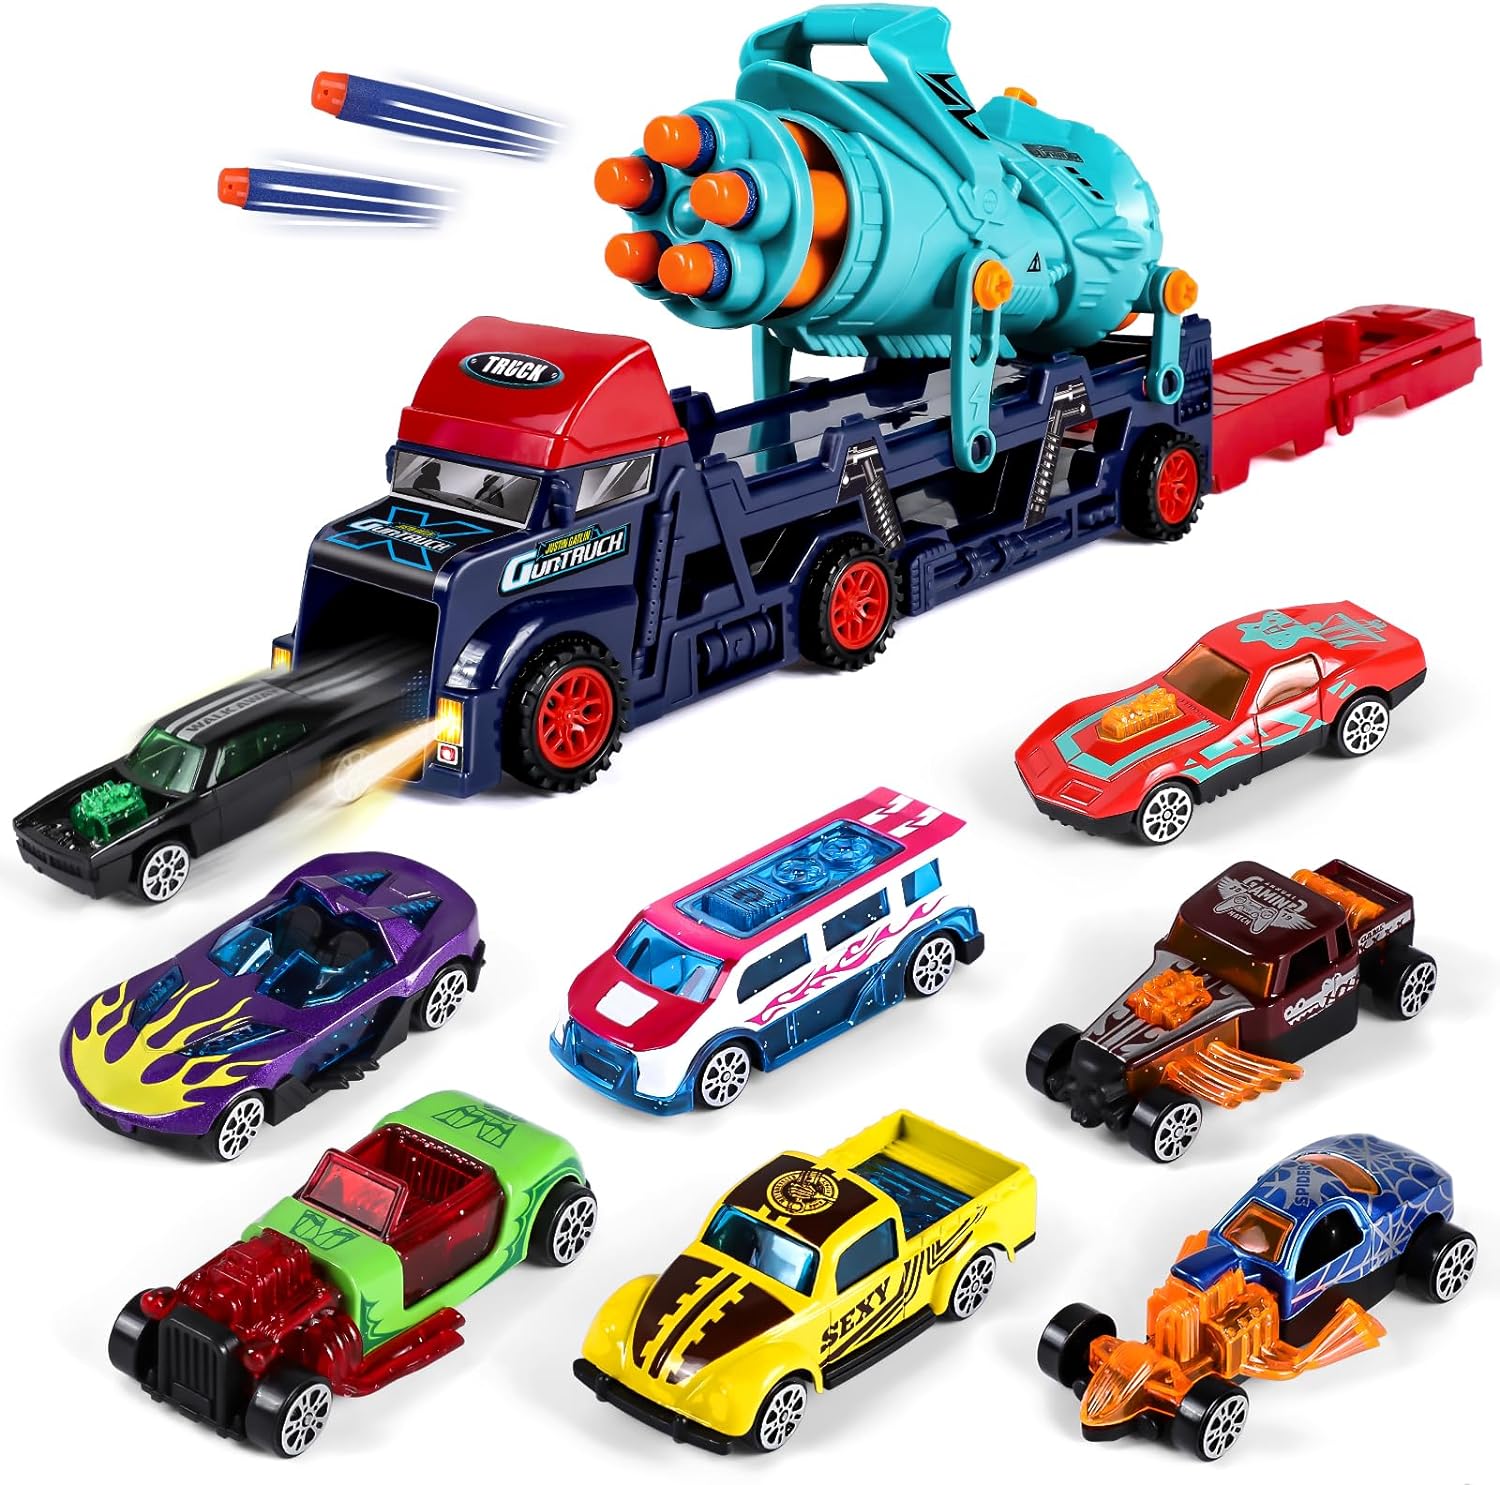 AOKESI Car Carrier Truck Toys for Kids, 4 in 1 Transport Truck Carrier Launcher Toys with 8 Alloy Car, Ideal Gift for Boys Aged 3 